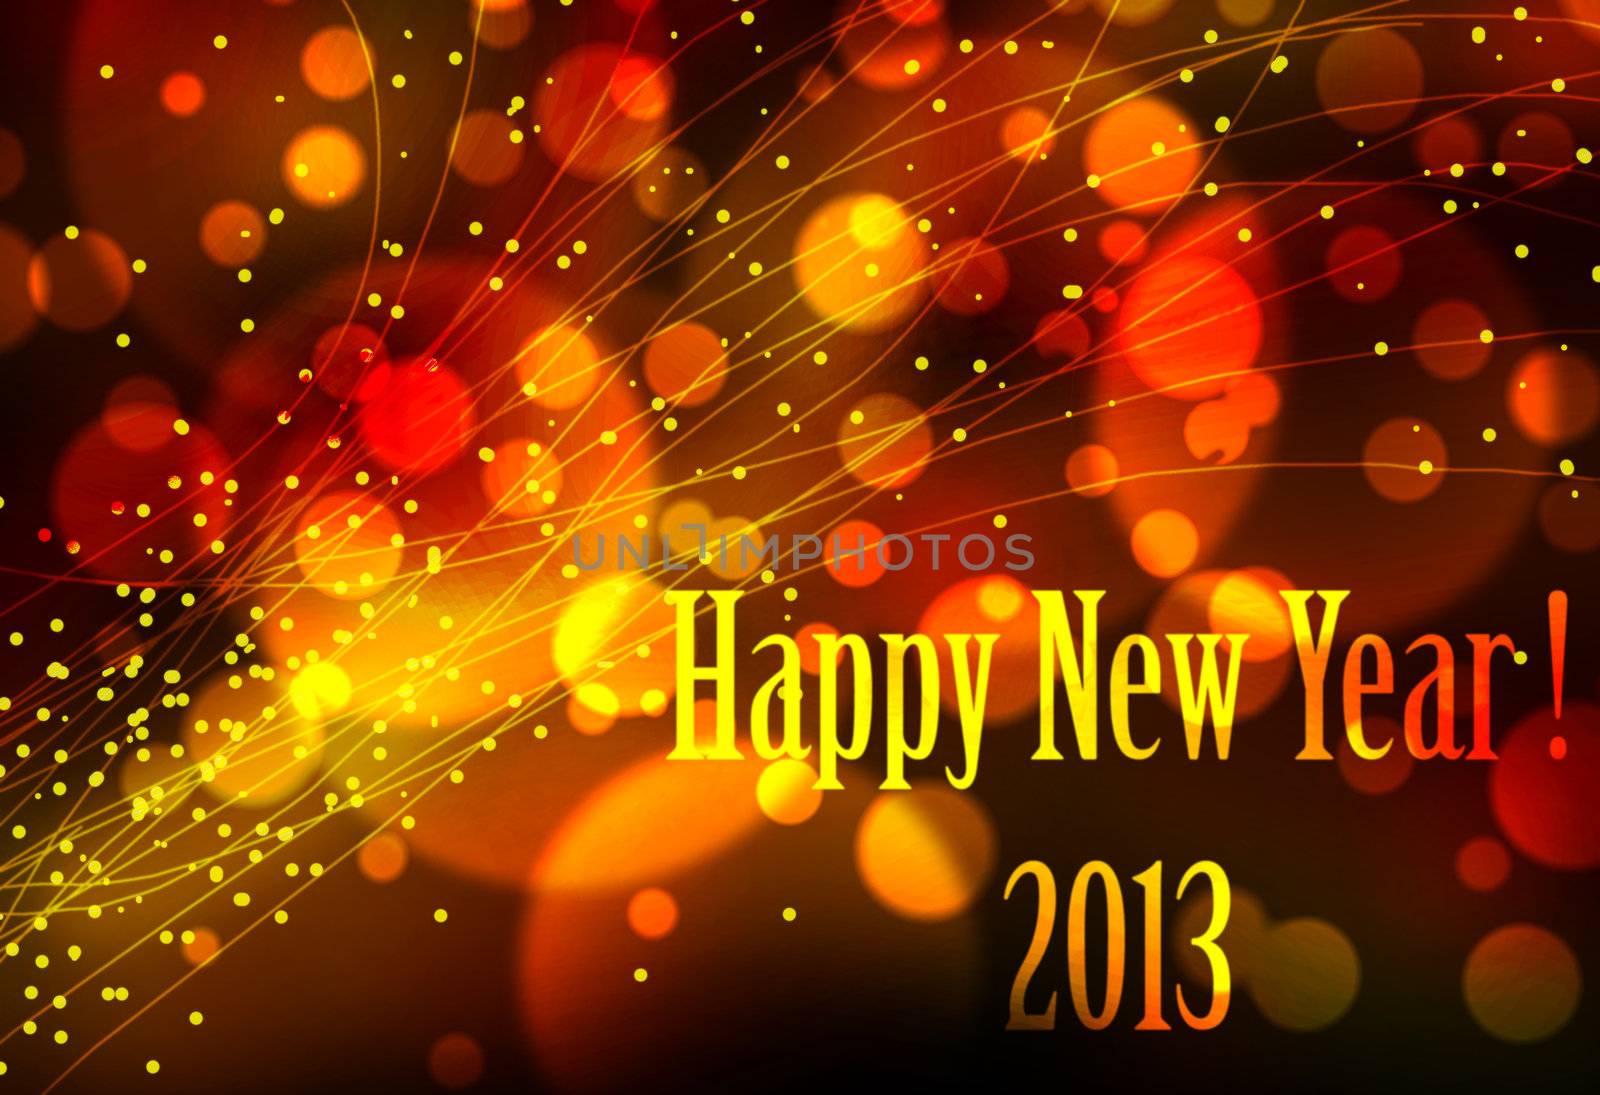 Happy new year 2013 card or background with bright lights effects or neon, very festive.